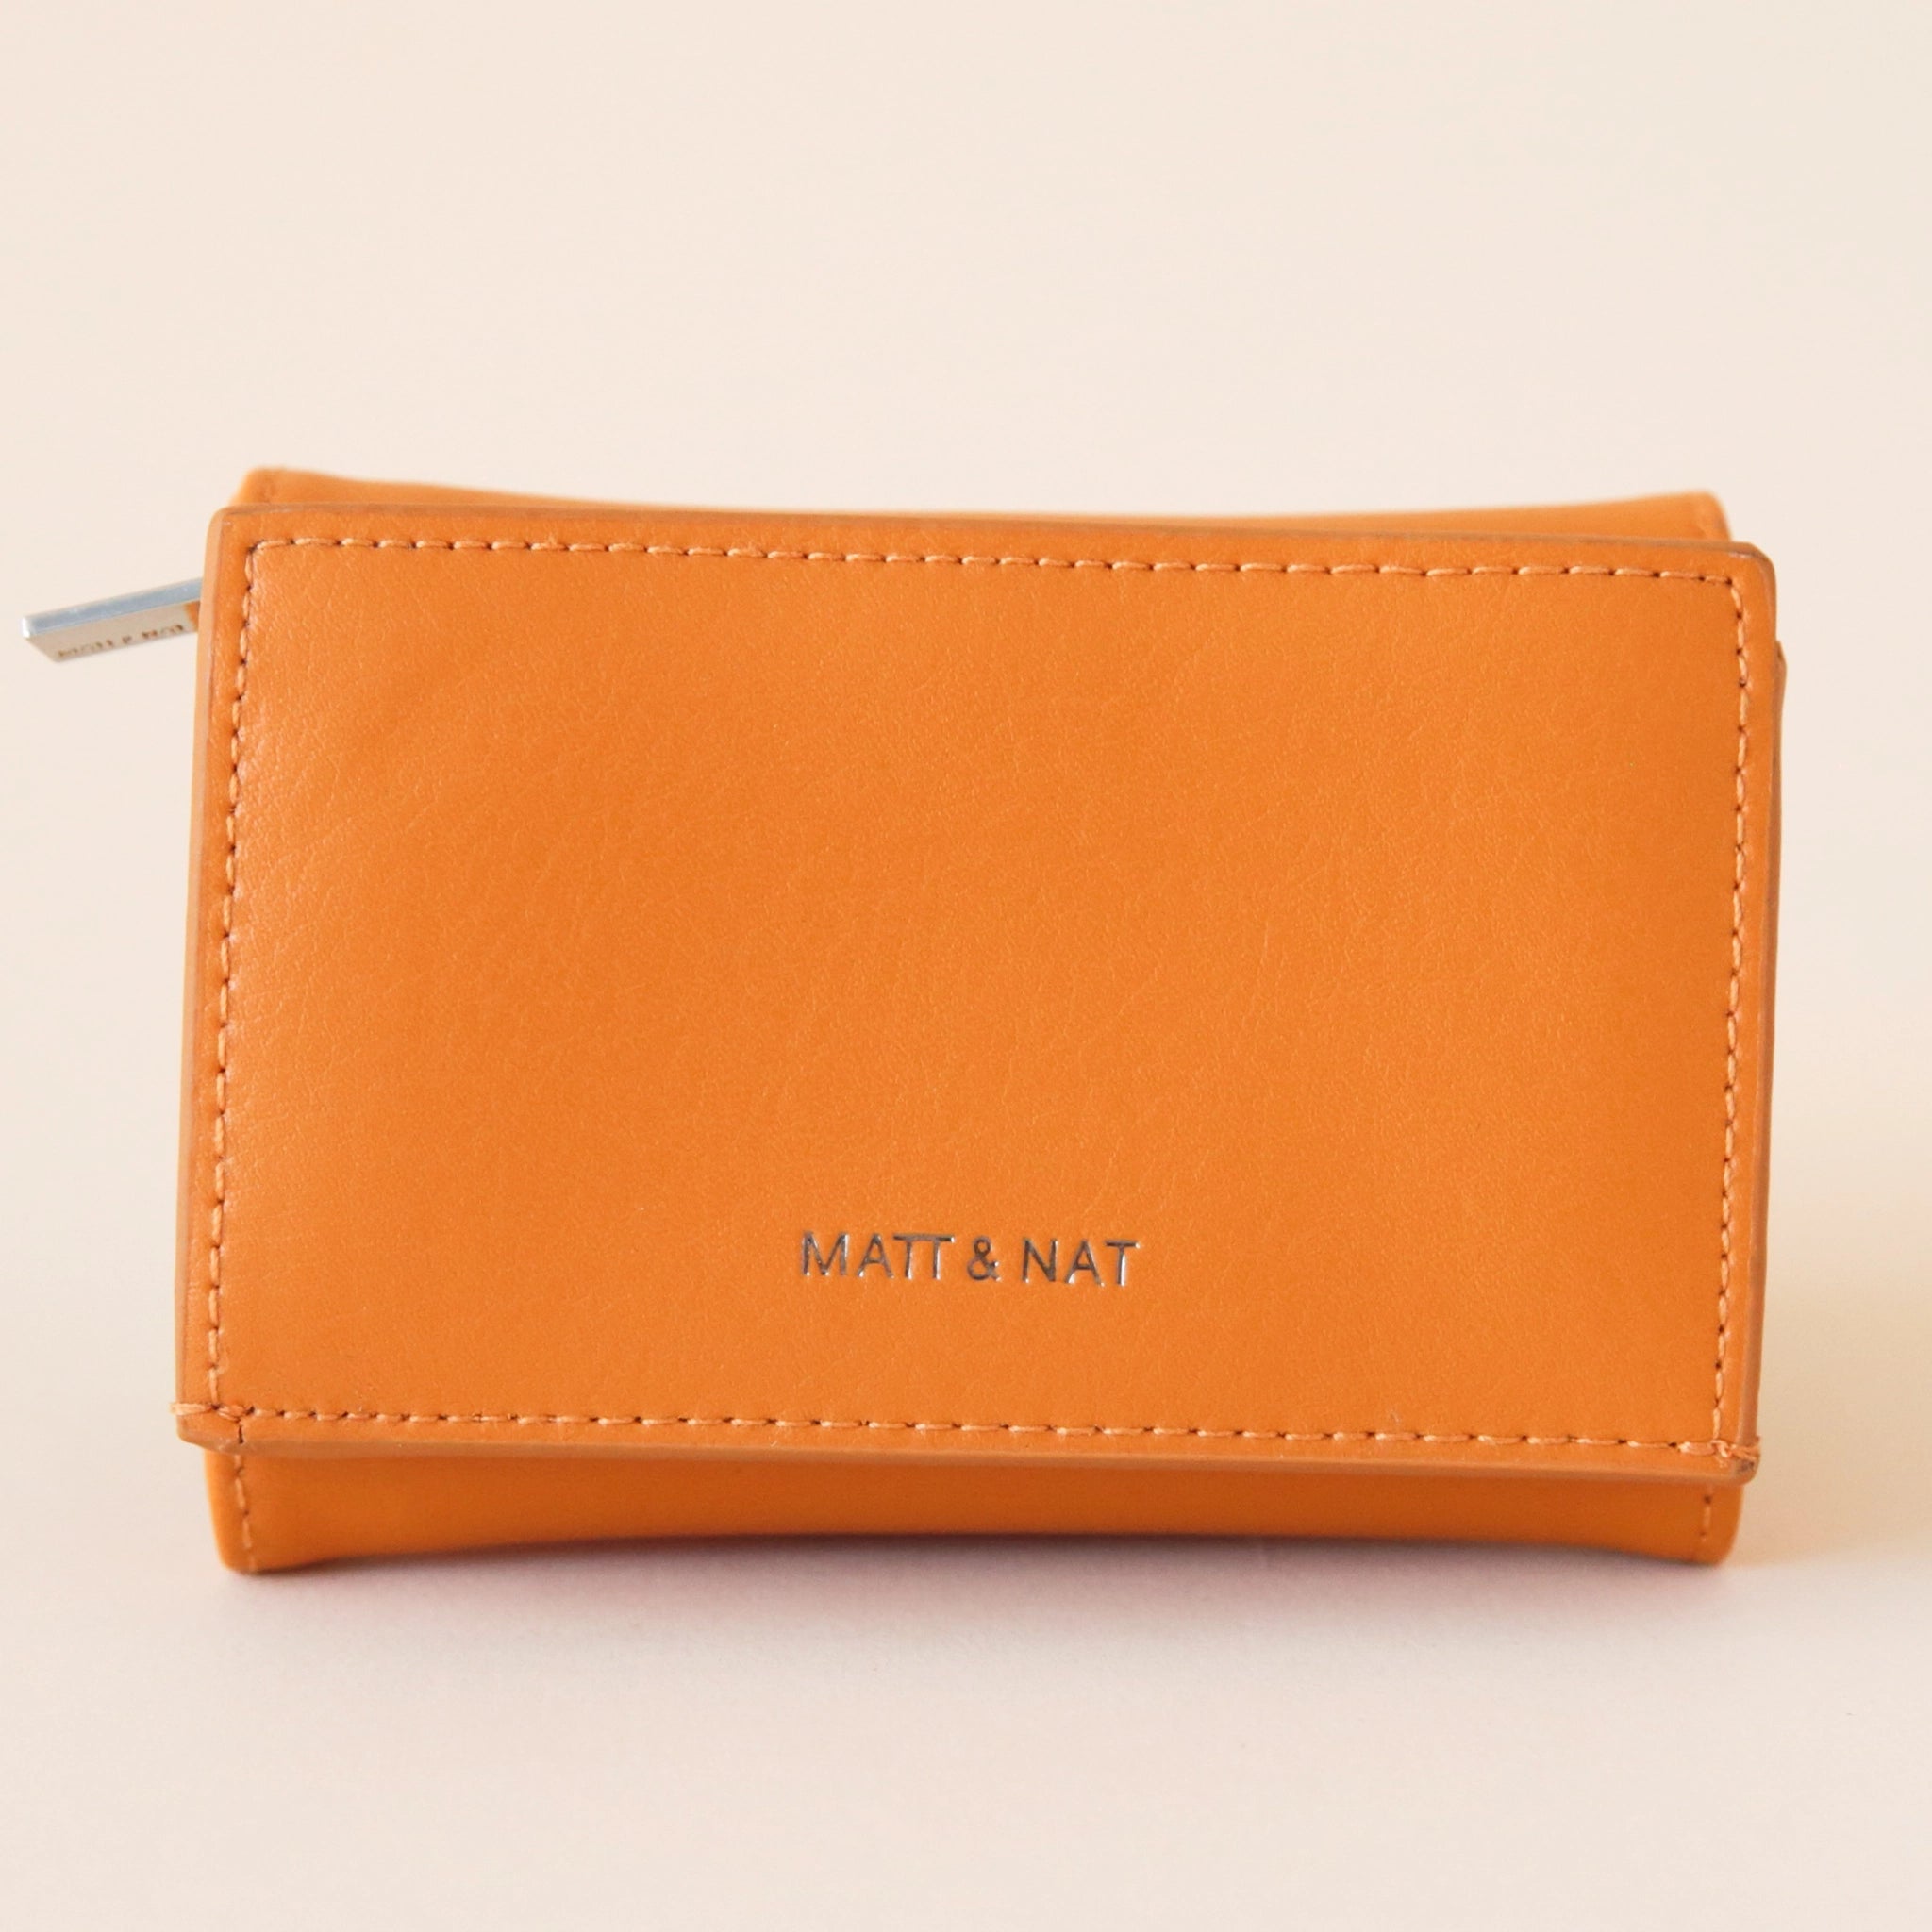 On a cream background is a bright orange colored squares wallet with a folding detail and tiny text on the bottom of the front that reads, "Matt & Nat".